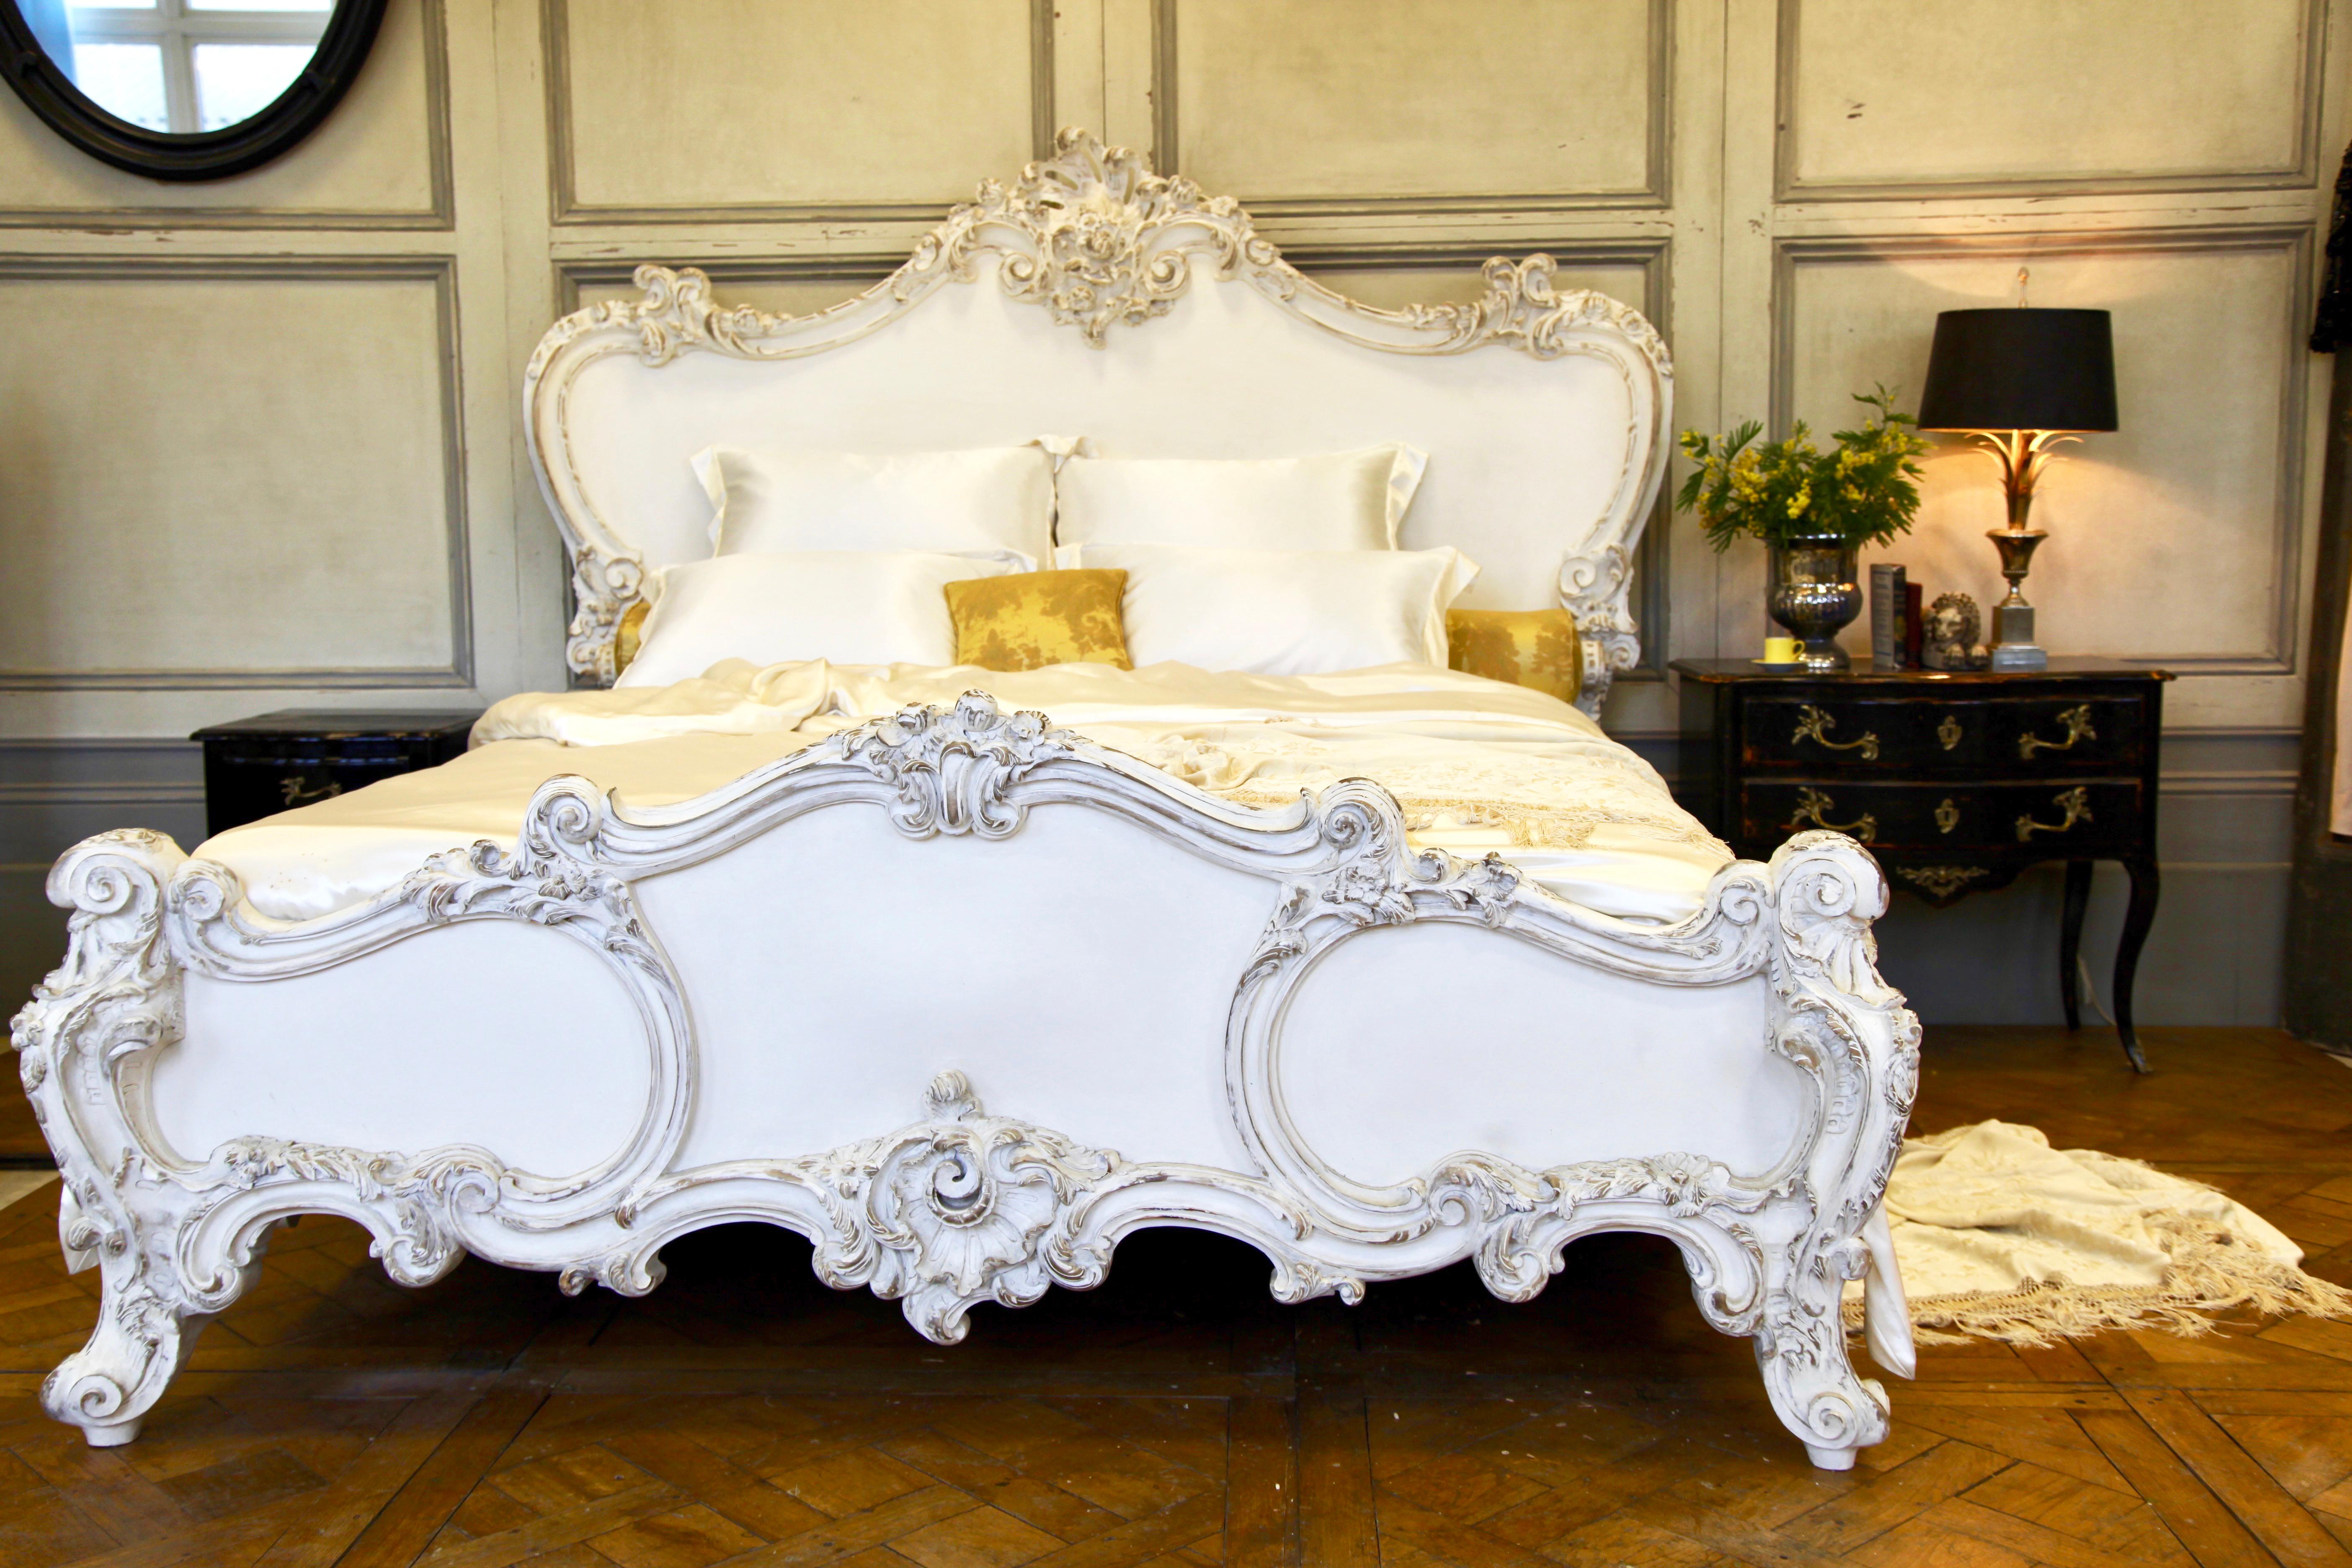 The Cherub Bed Hand Crafted In The Rococo Style Made By La Maison London 4